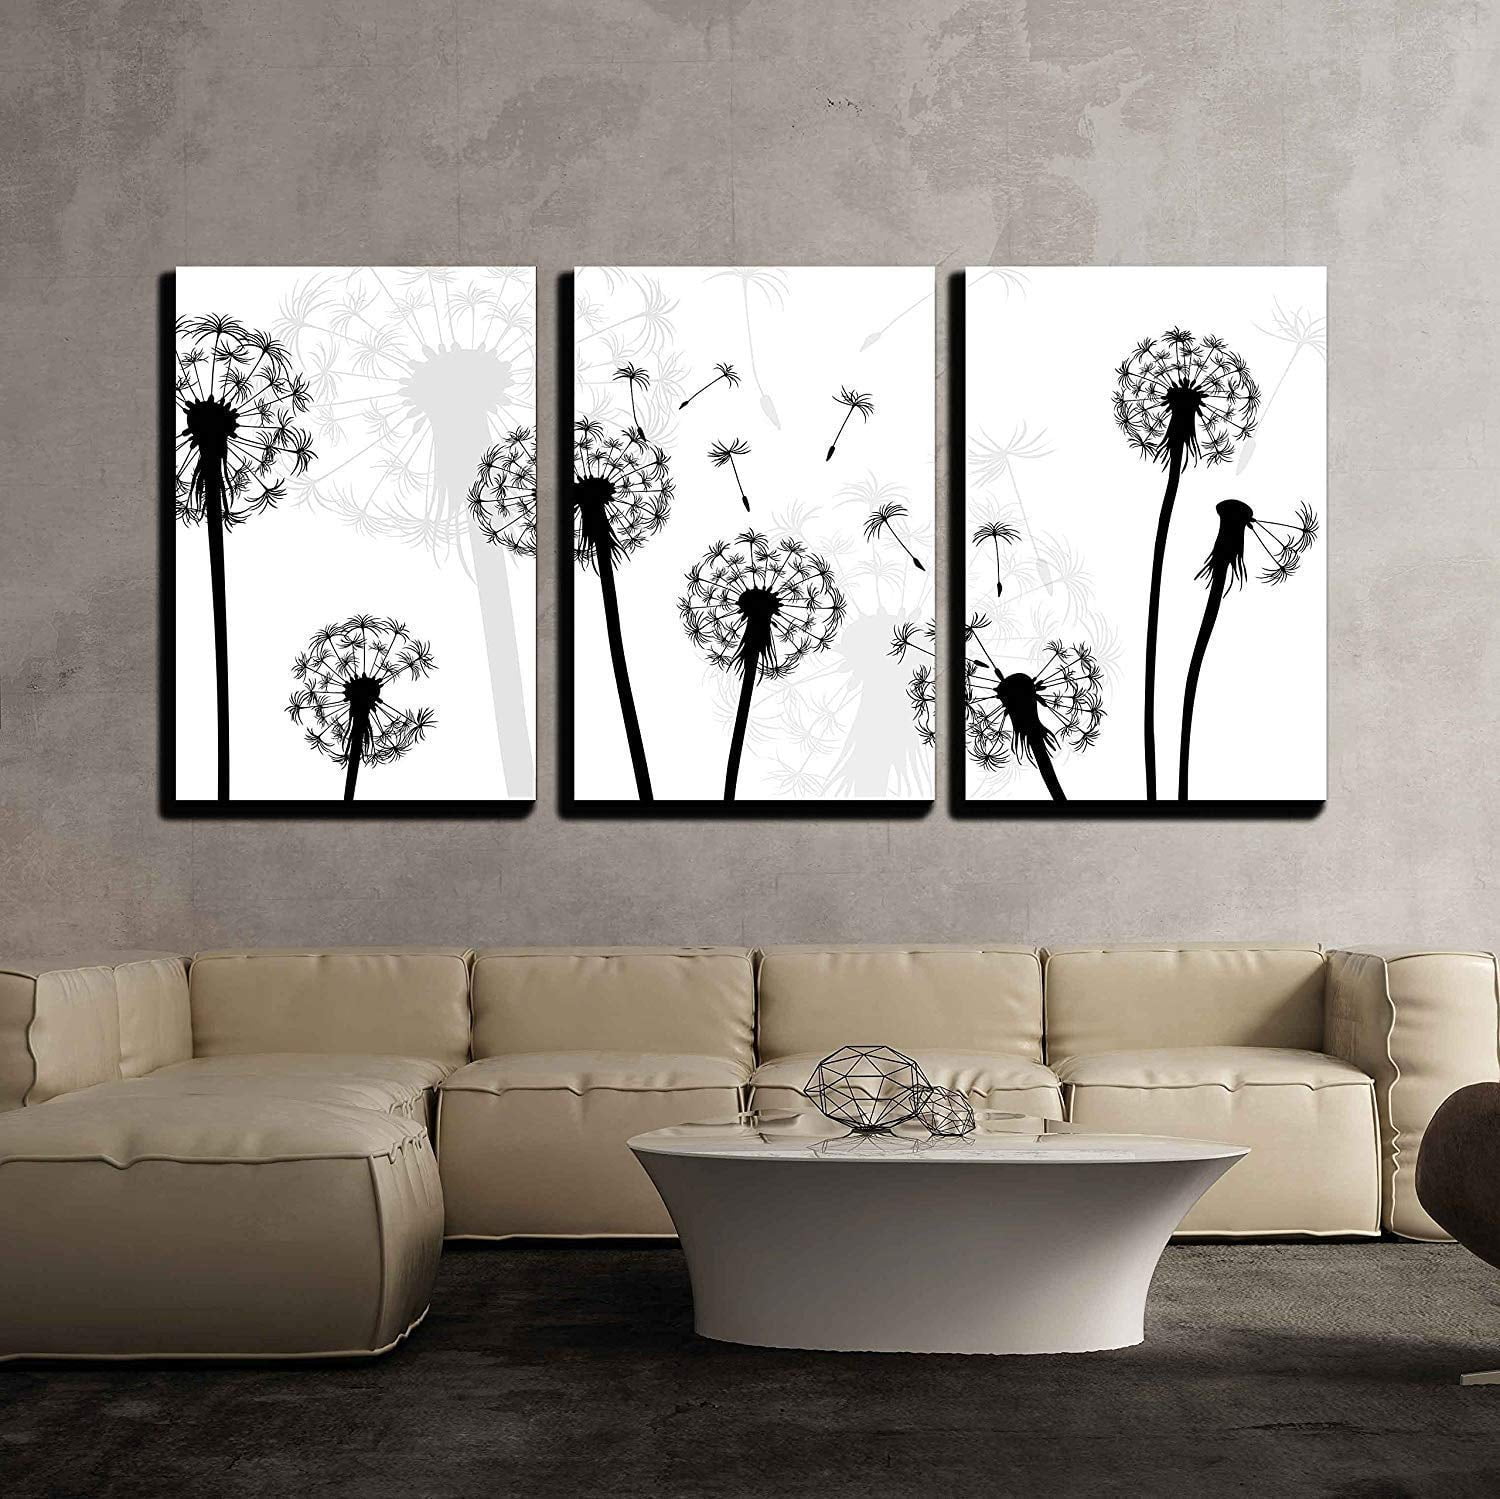 Abstract Iron Open Wall Art PanelRiver Stones Charcoal Black Skipping Rocks 